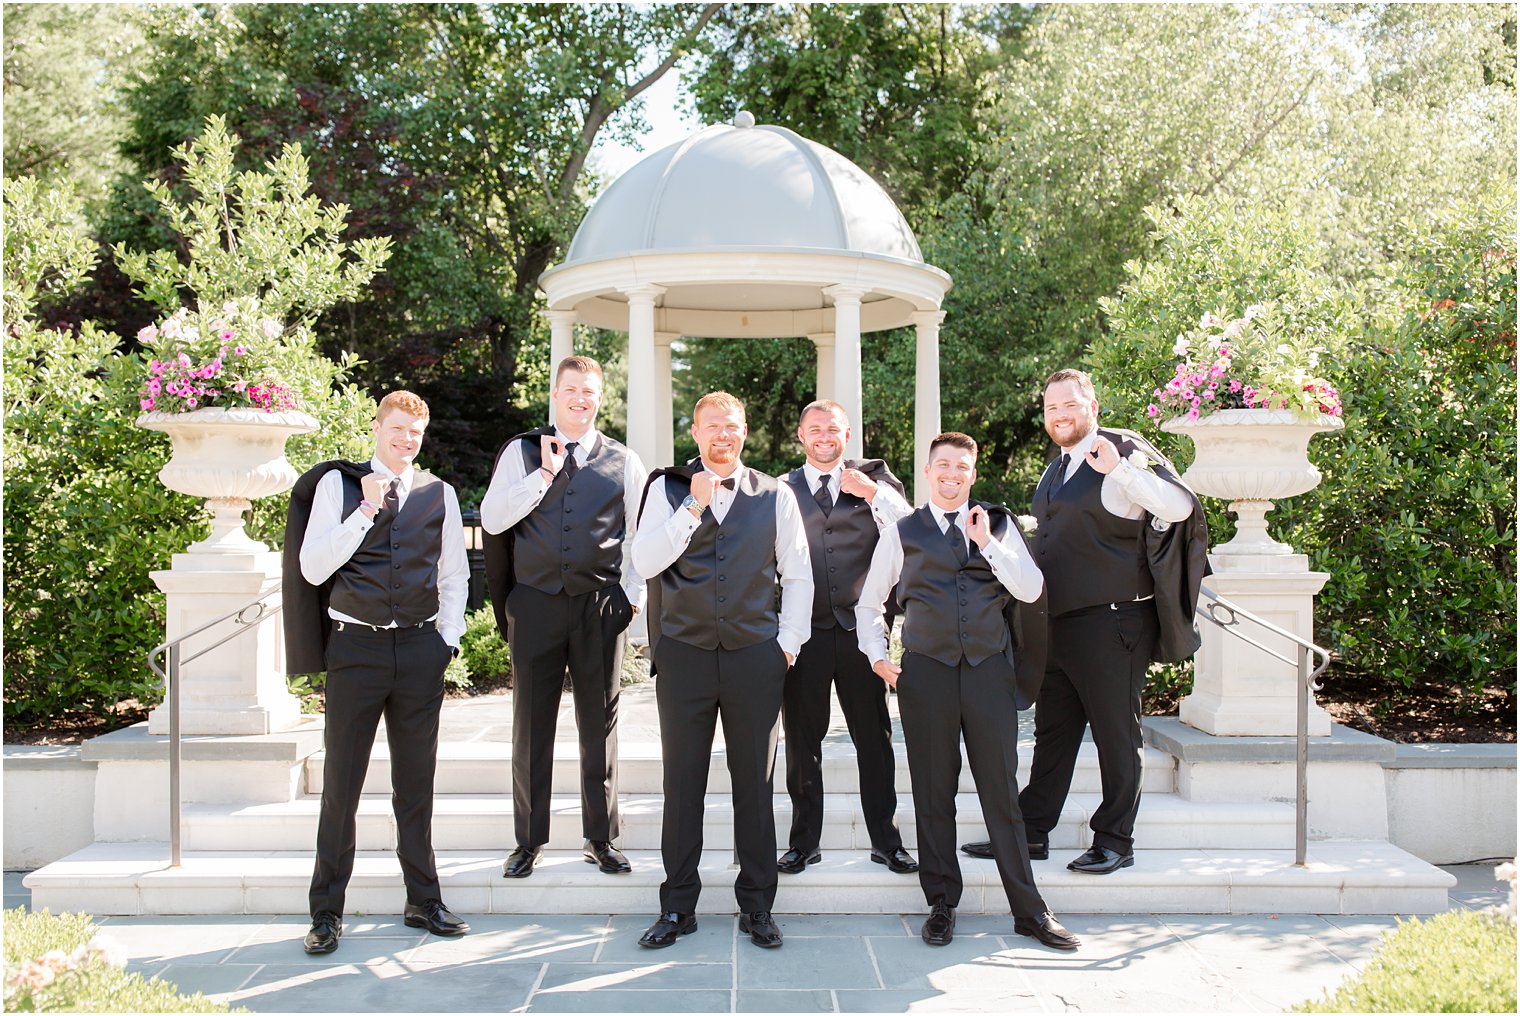 Groomsman portraits at Park Chateau Estate and Gardens